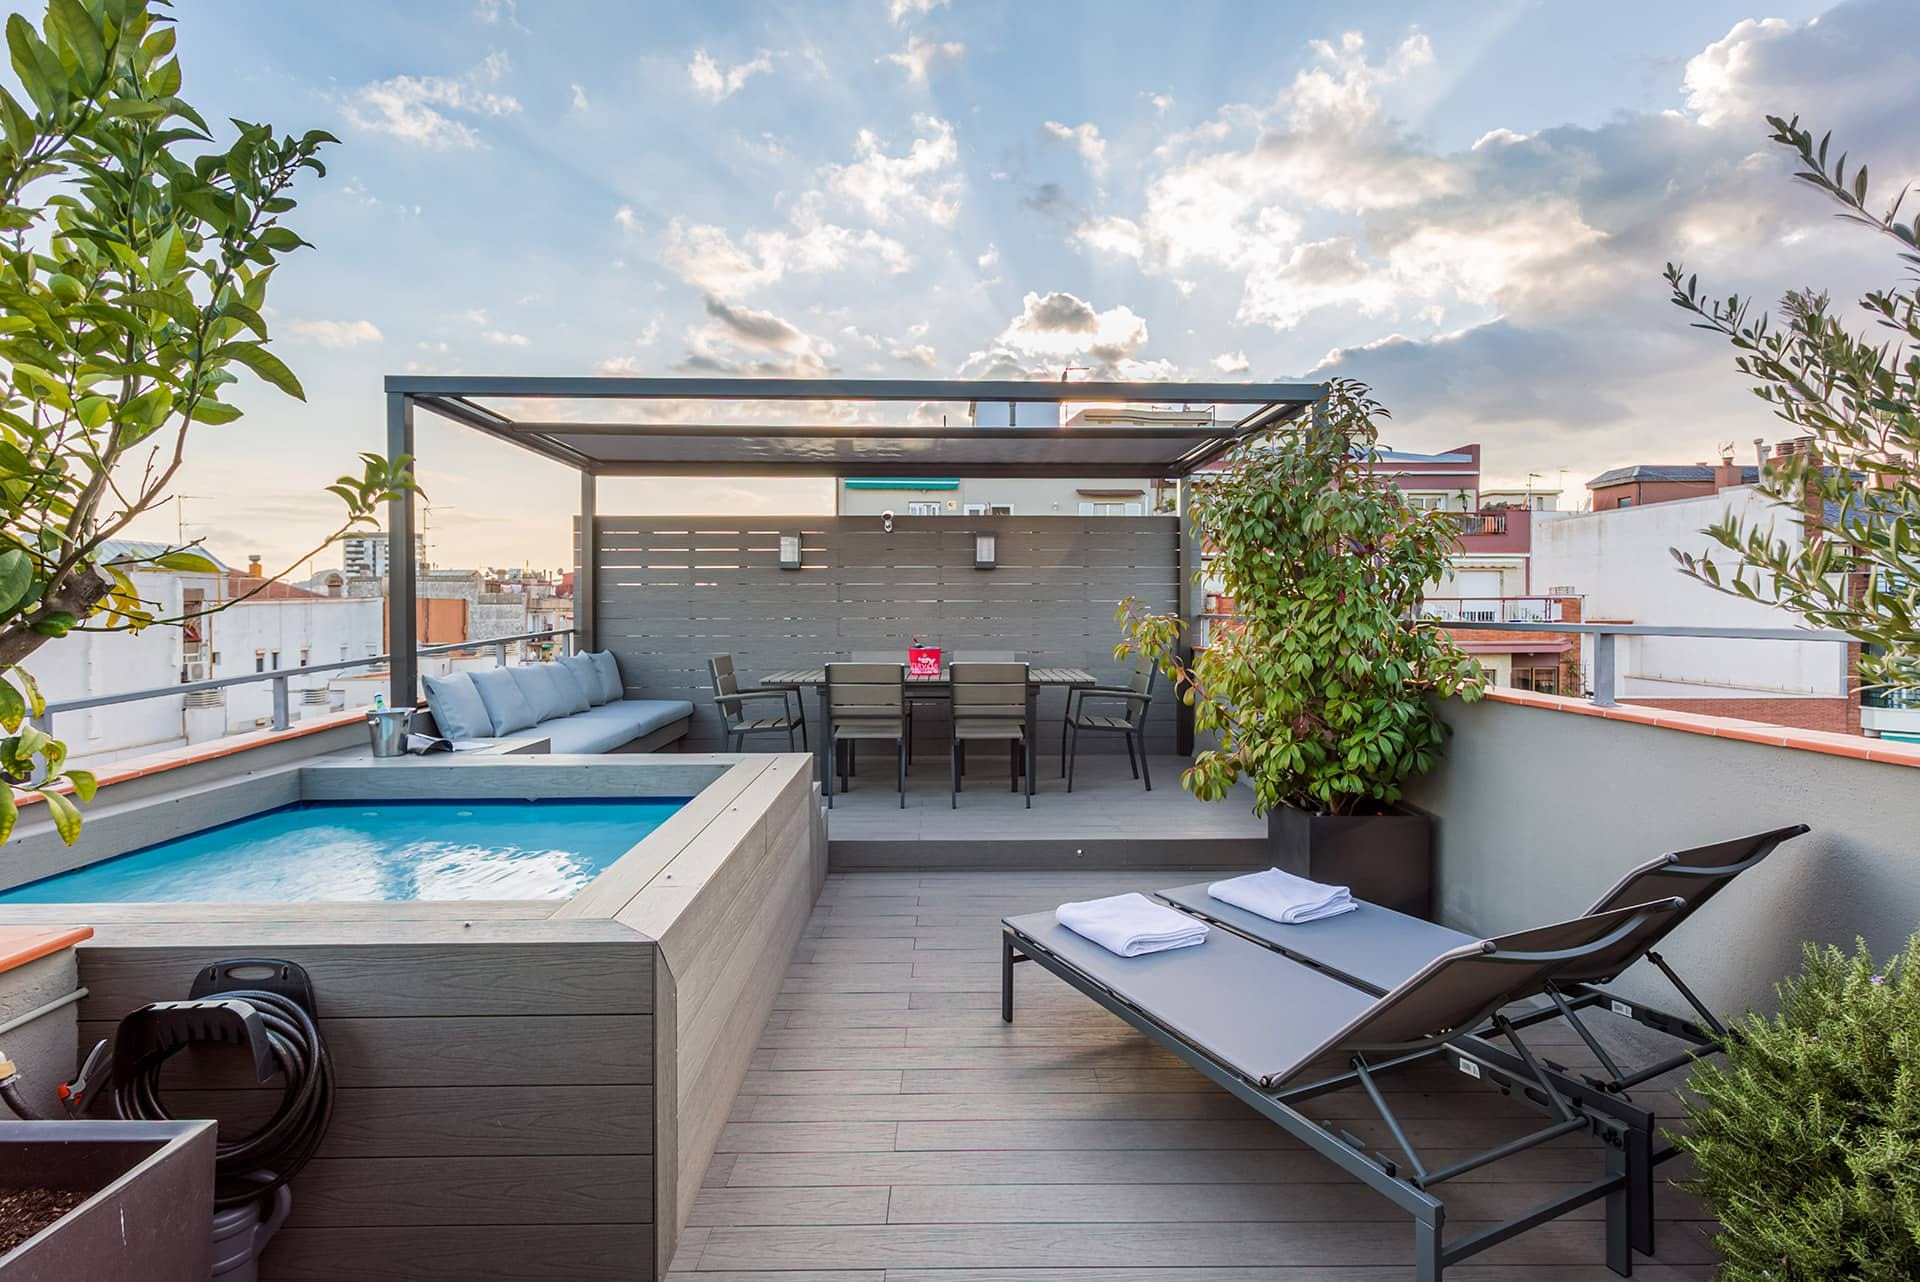 Luxury penthouse for sale with private terrace in the Eixample Barcelona